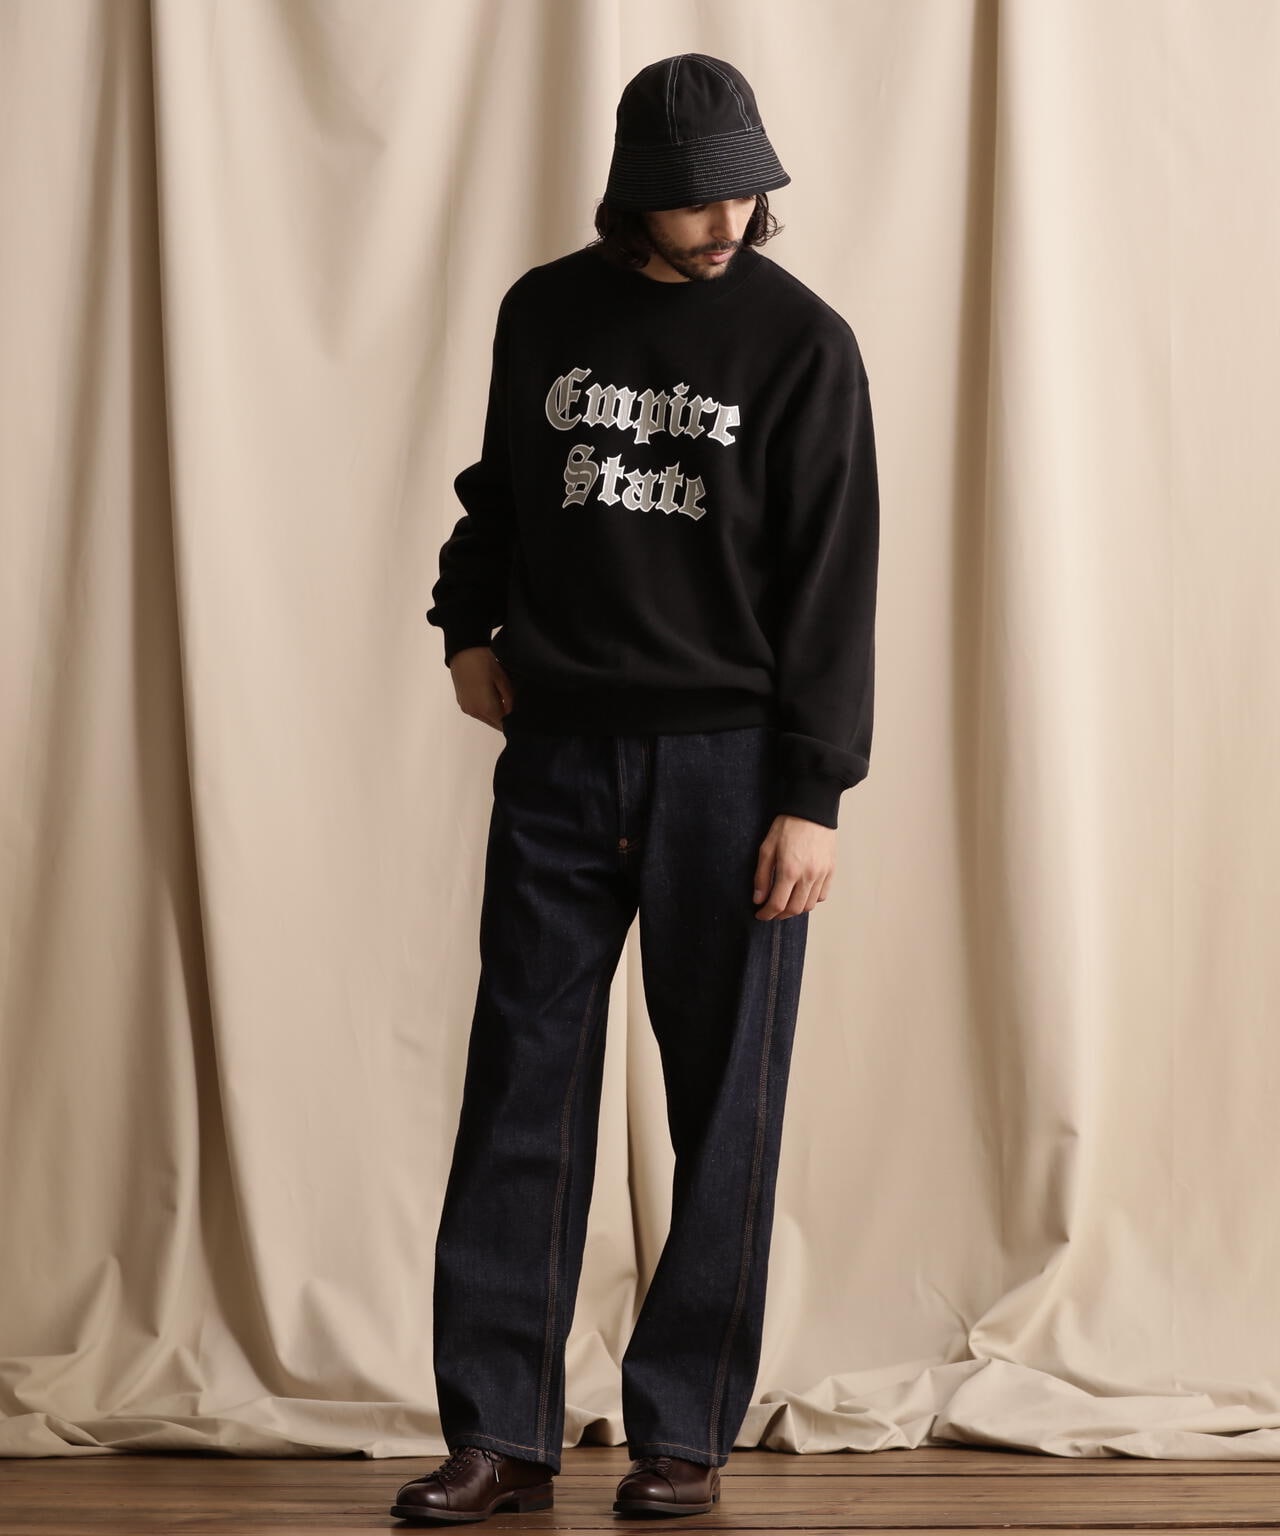 WEB LIMITED/LIMCREW SWEAT EMPIRE STATE/エンパイアステイト クルー